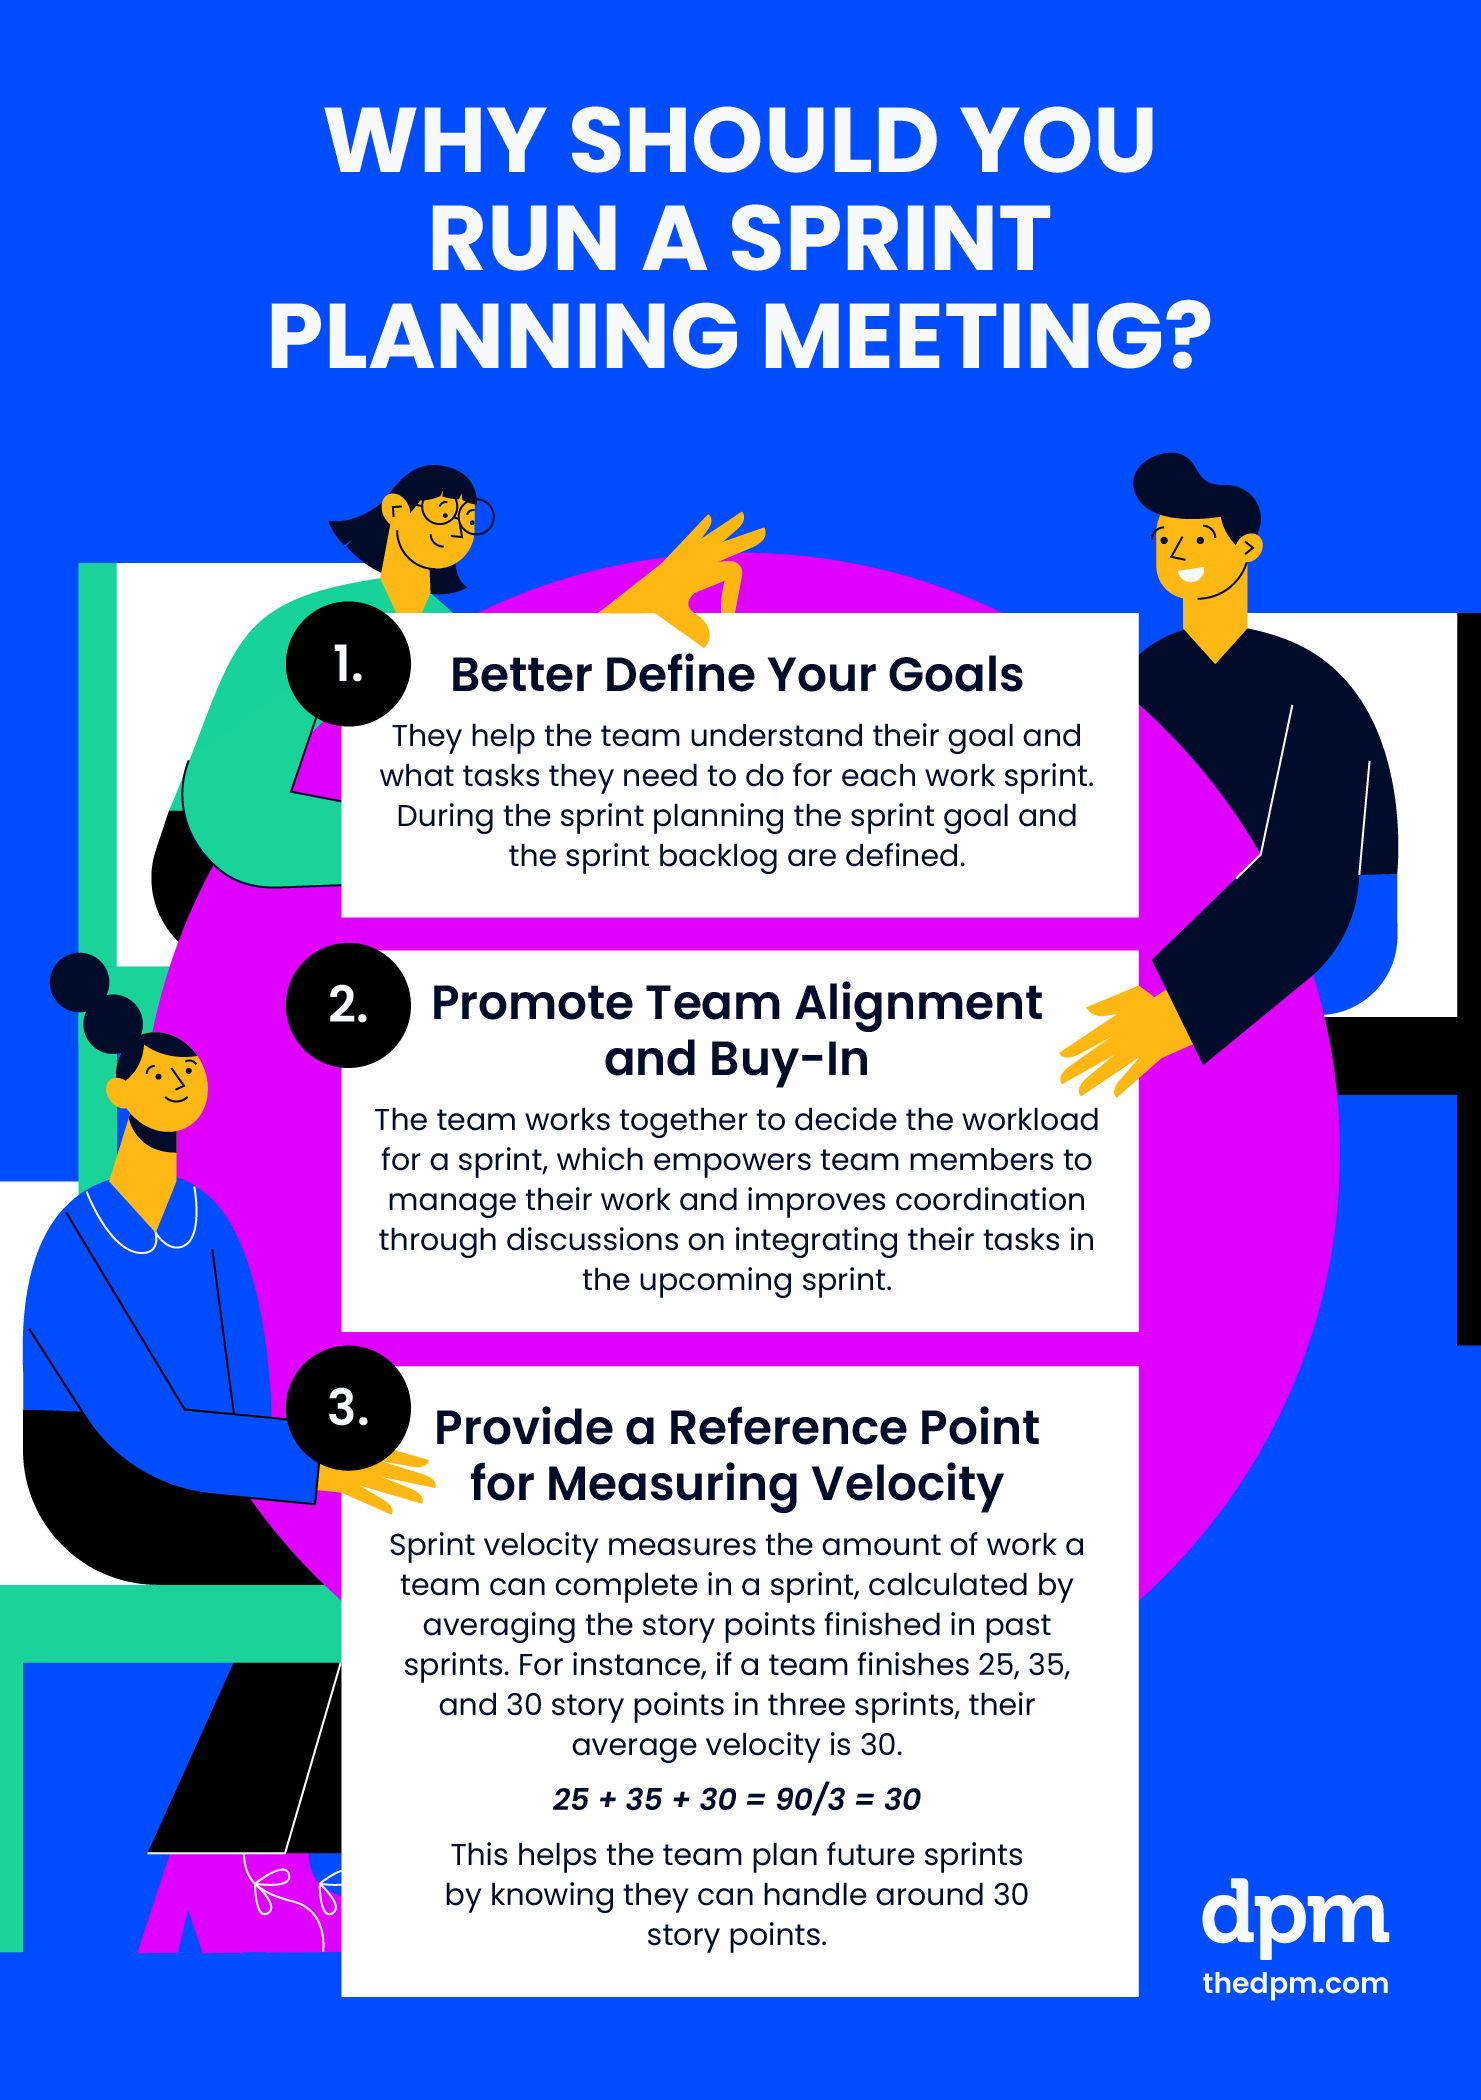 3 reasons why you should run a sprint planning meeting